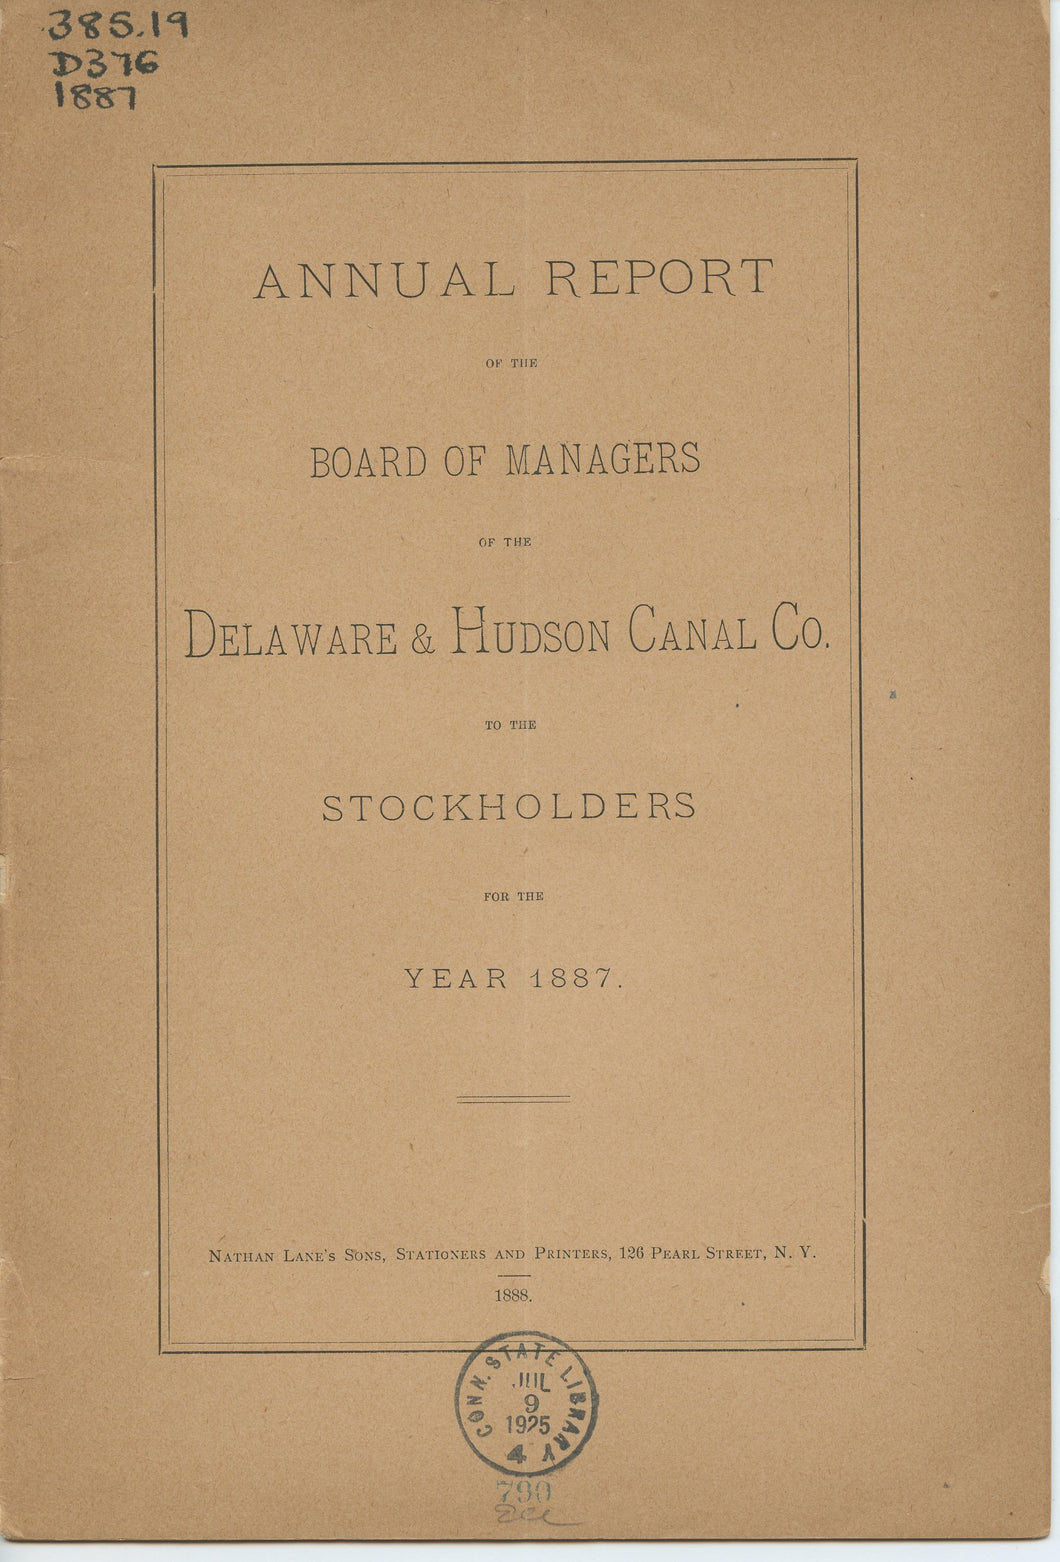 Annual Report of the Board of Managers of the Delaware & Hudson Canal Co. to the Stockholders, for the Year 1887